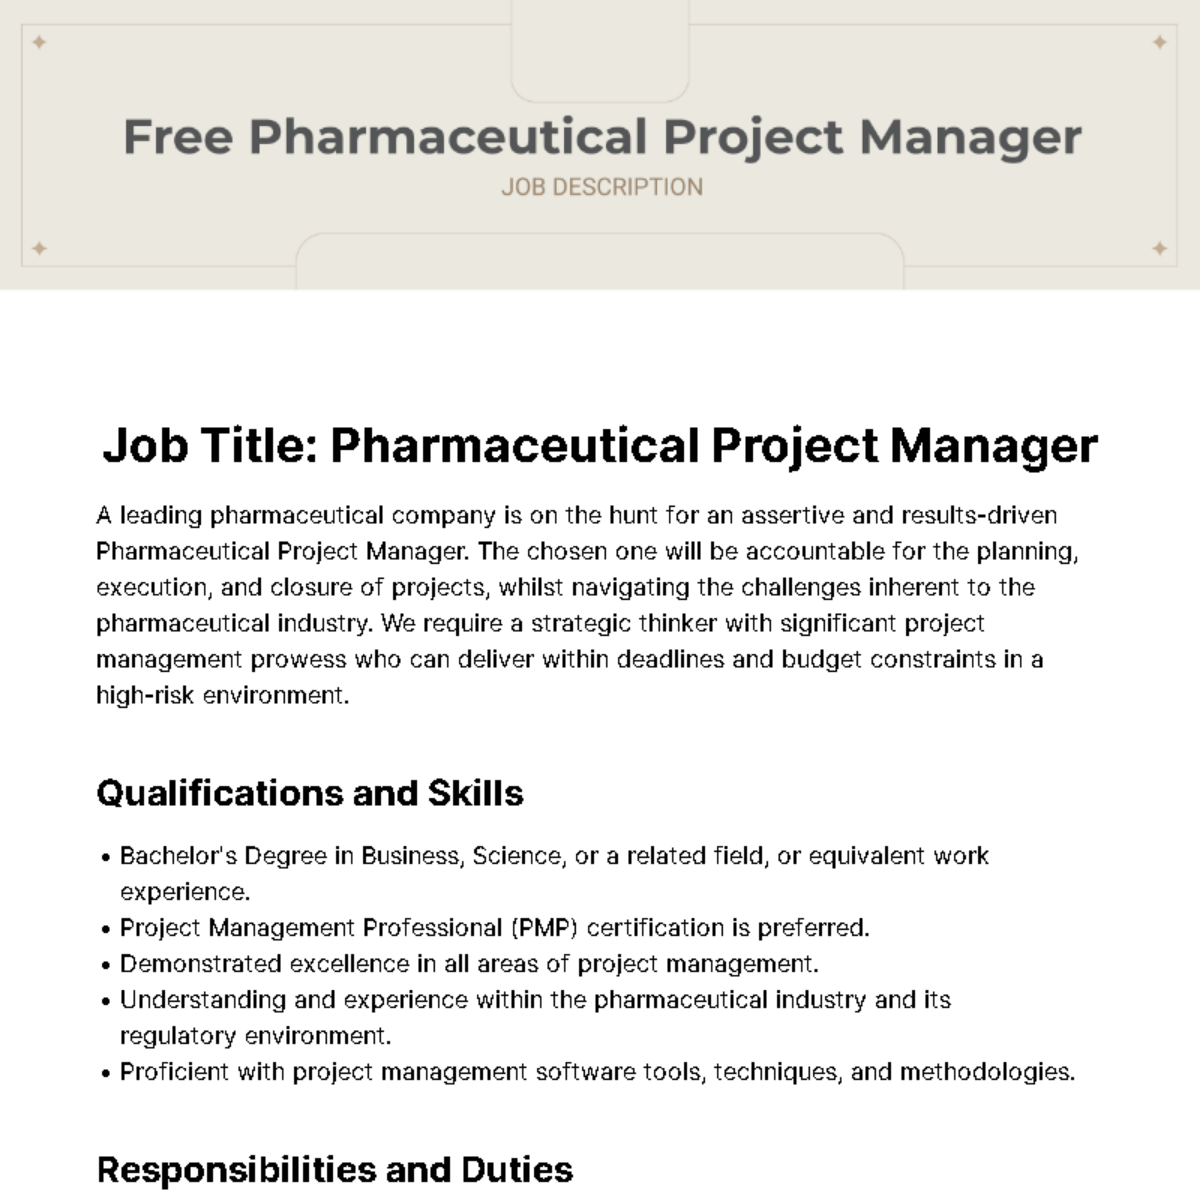 Free Pharmaceutical Project Manager Job Description Template